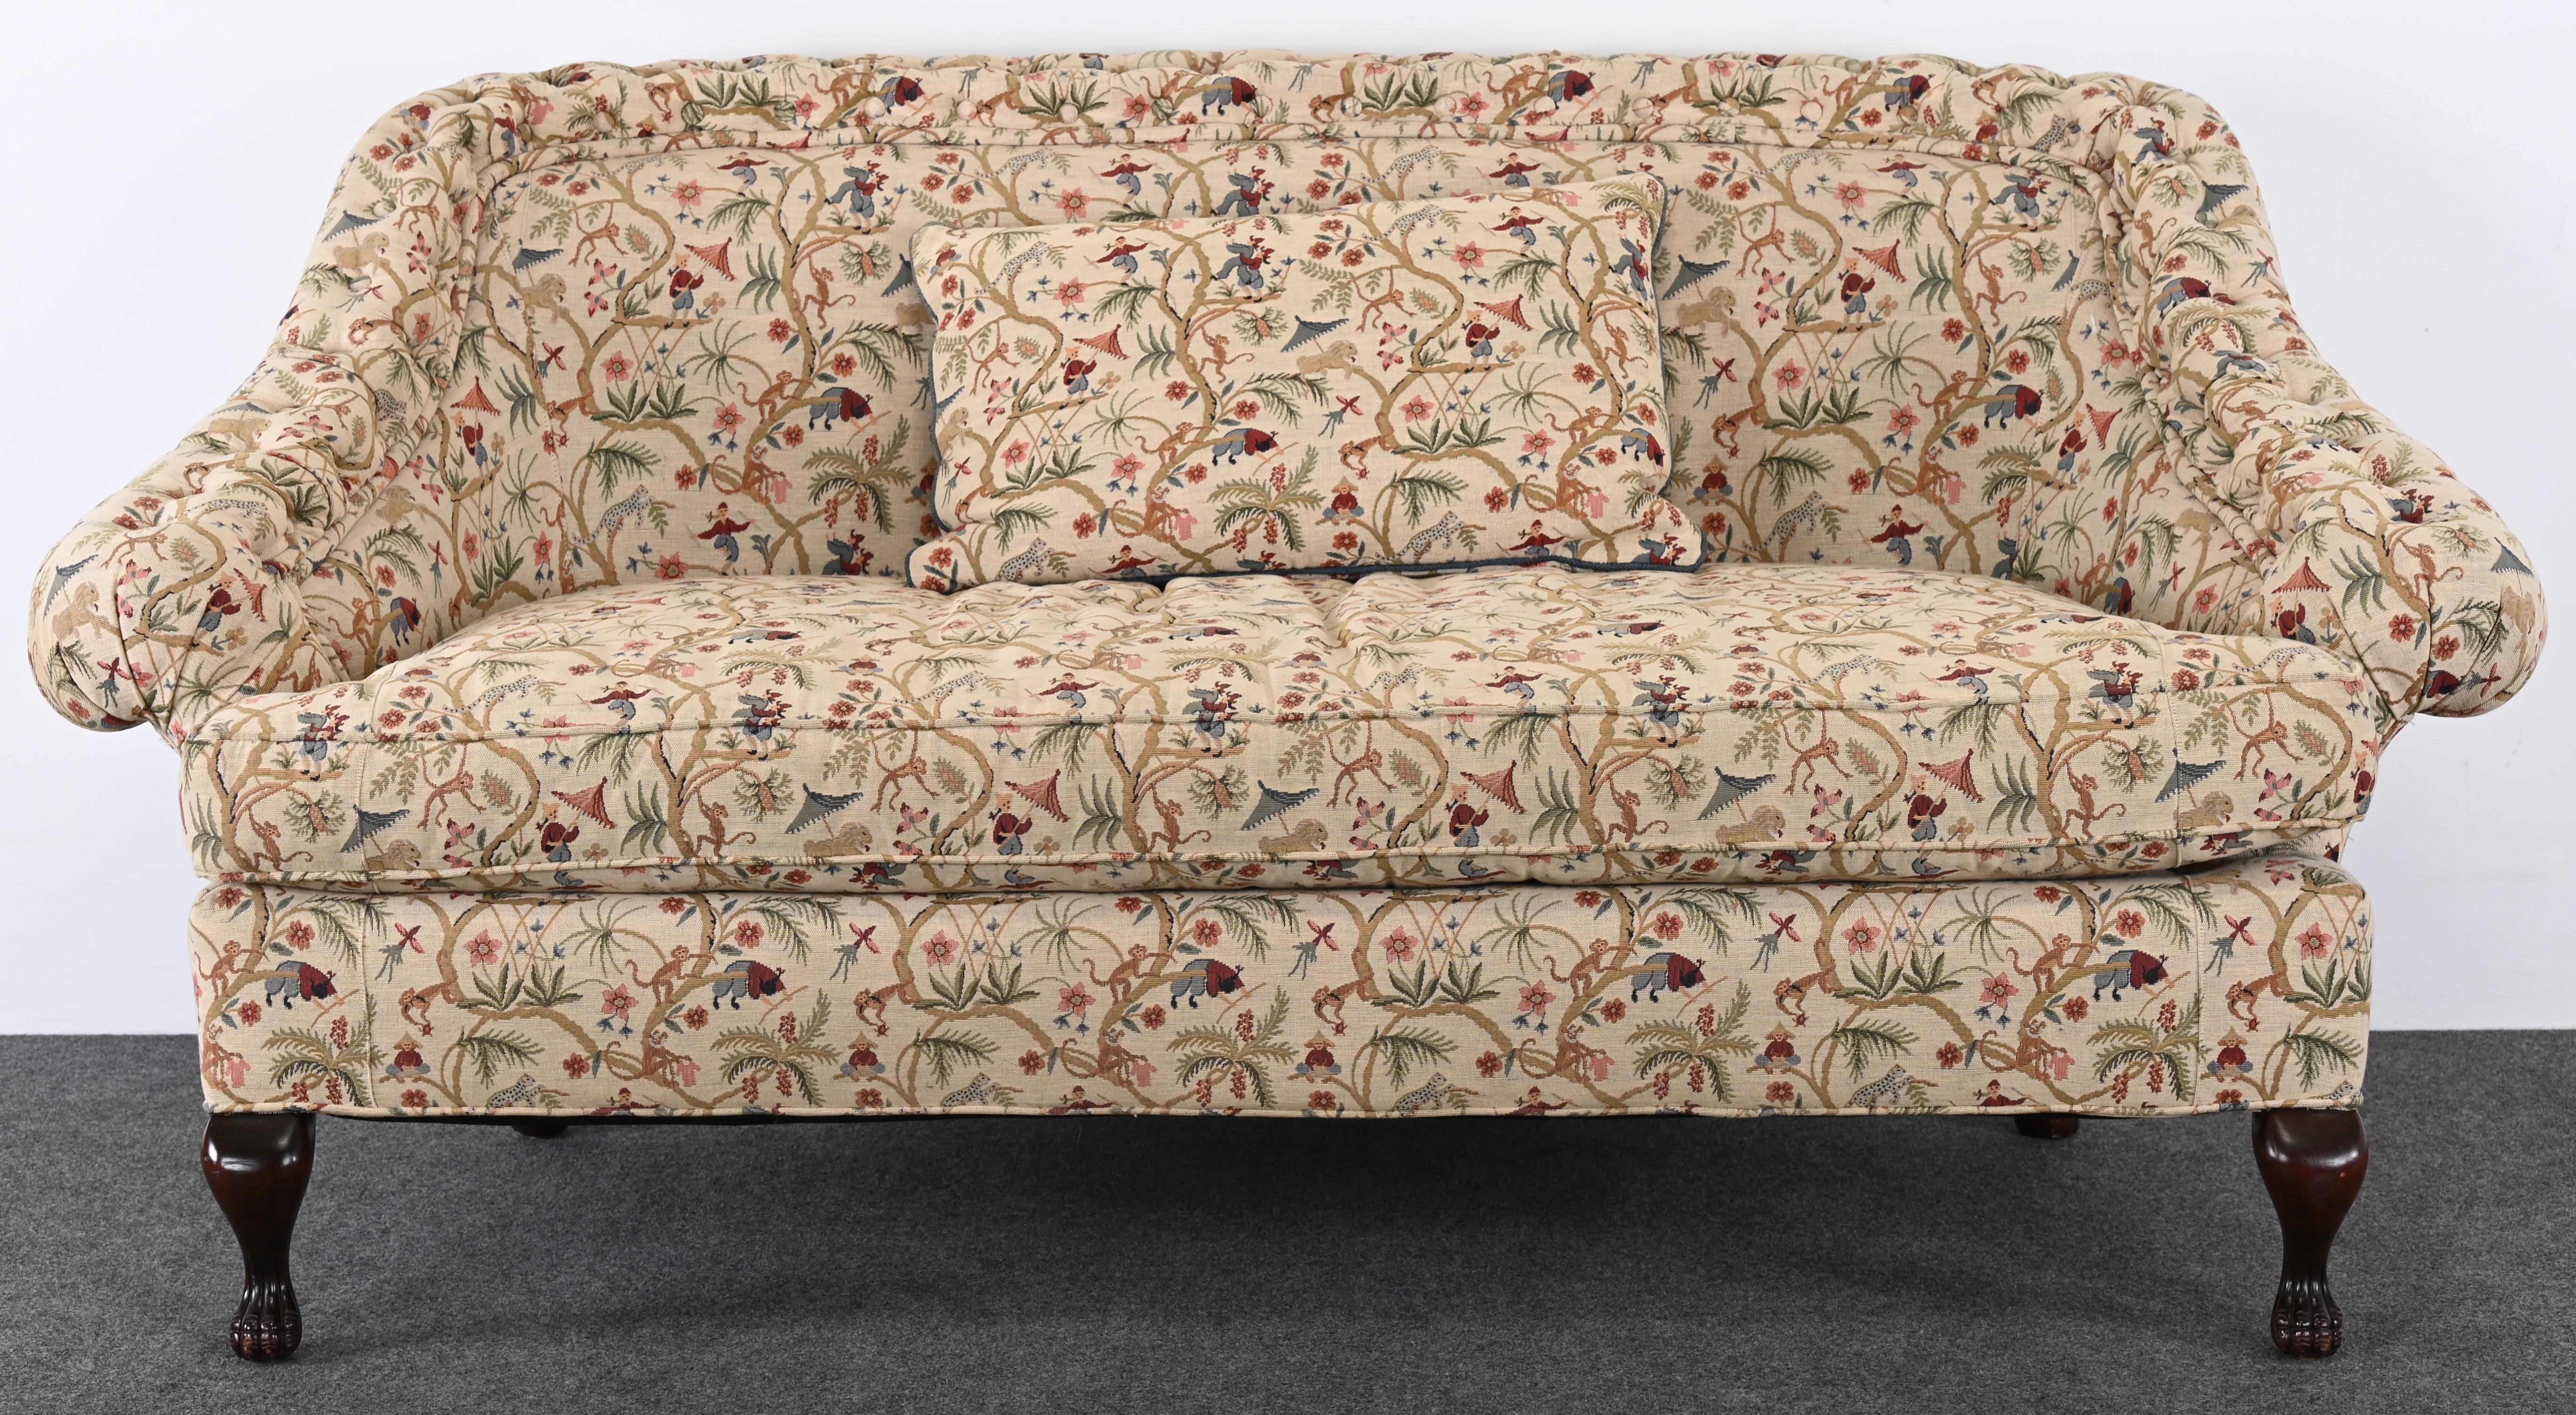 A decorative English sofa specially made for Harrod's Fine Furniture Collection. The Victorian-style settee or loveseat is upholstered in an authentic period fabric. This sofa would look great in any Victorian home with a traditional aesthetic.